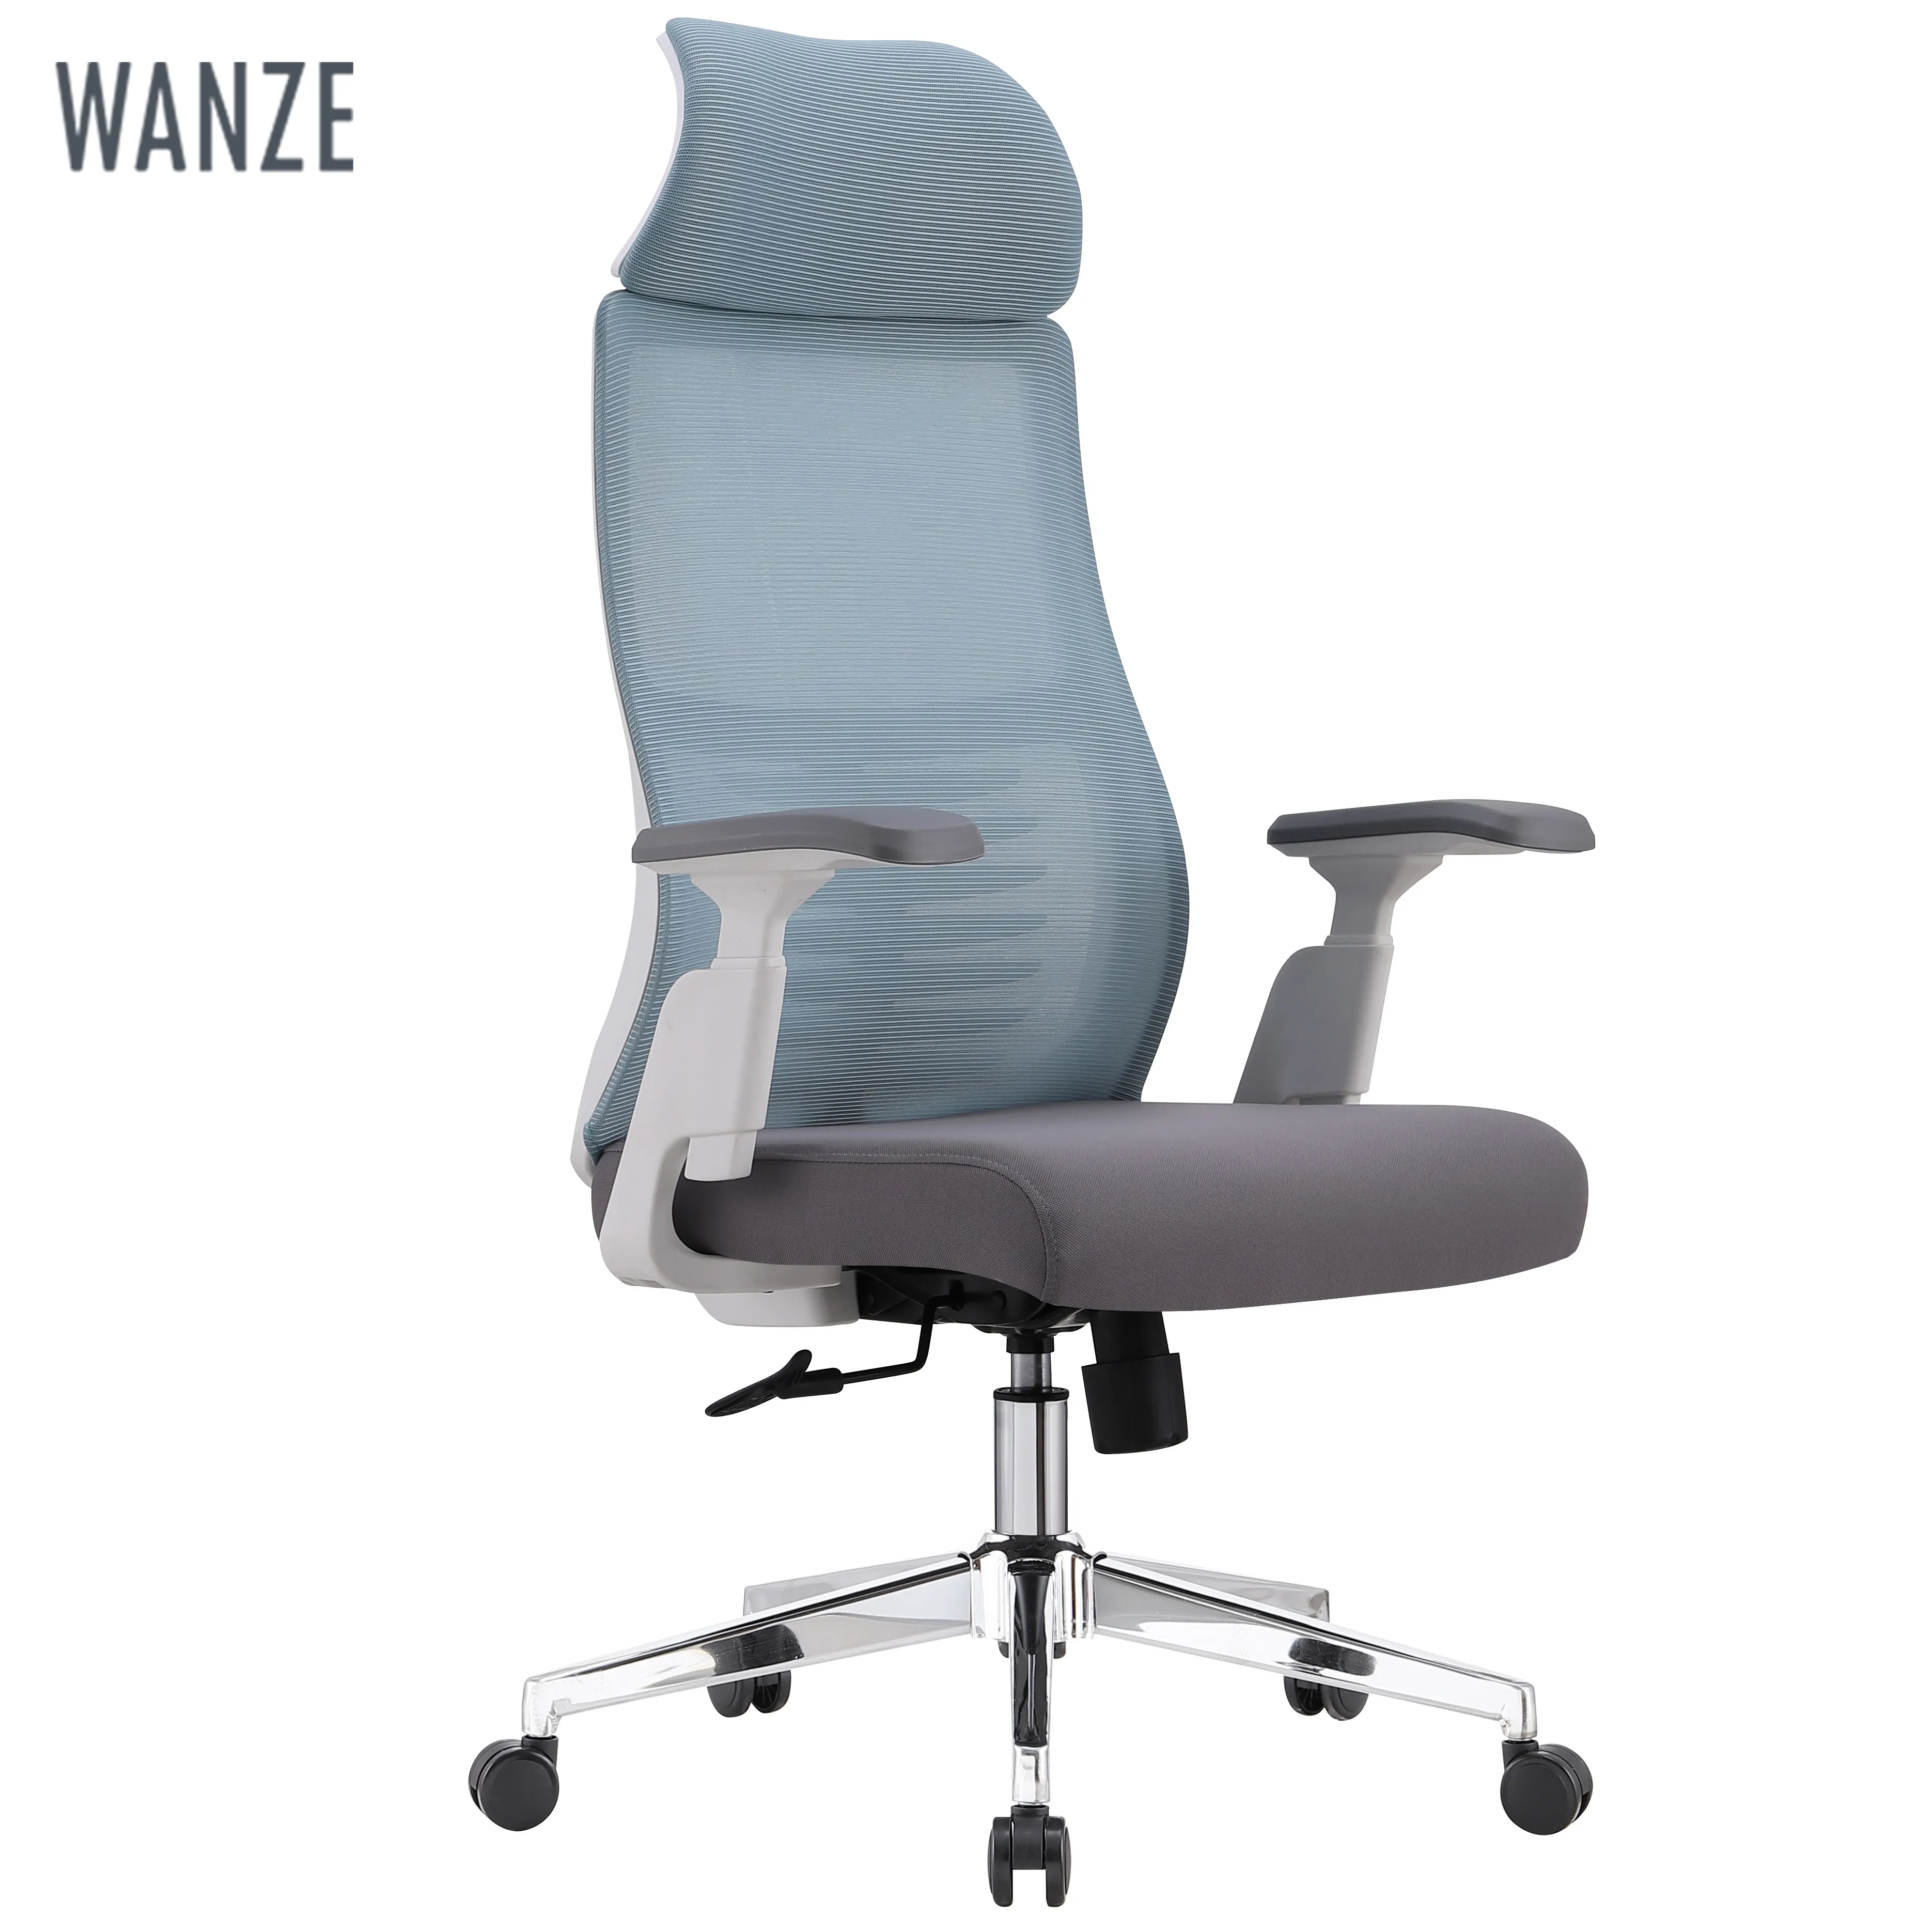 Home Office Luxury Work Chair Foreign Trade Wholesale Headrest Ergonomic Swivel Leisure Fabric Stainless Steel Modern 2 Years WZ